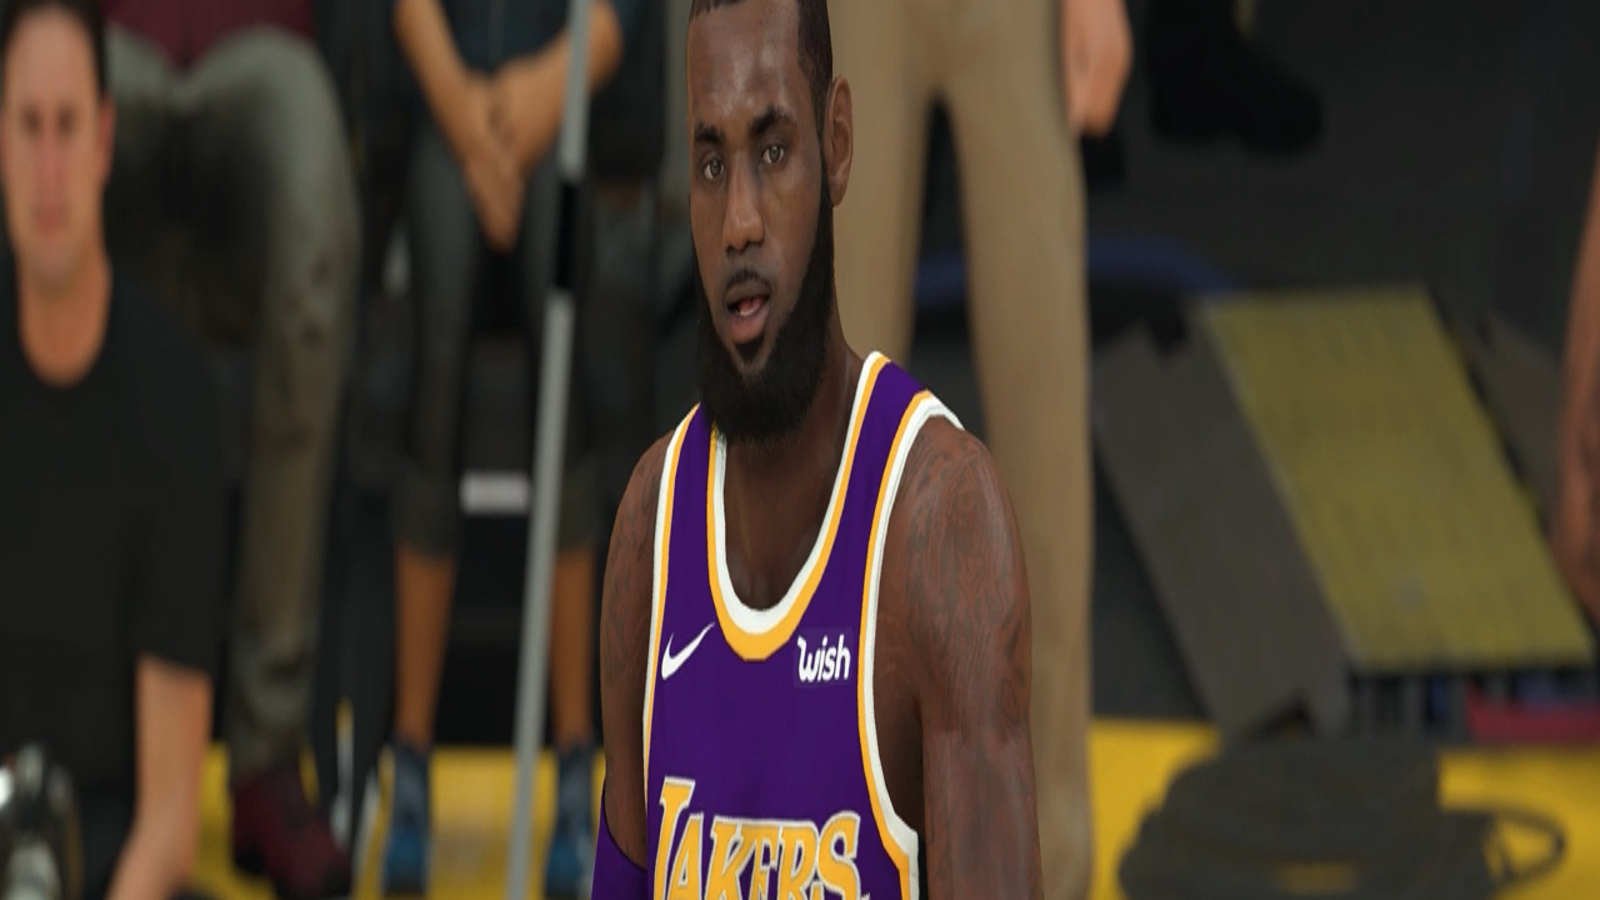 Hit the Pass  How to create and play with custom courts and uniforms in  NBA 2K16 Pro-Am